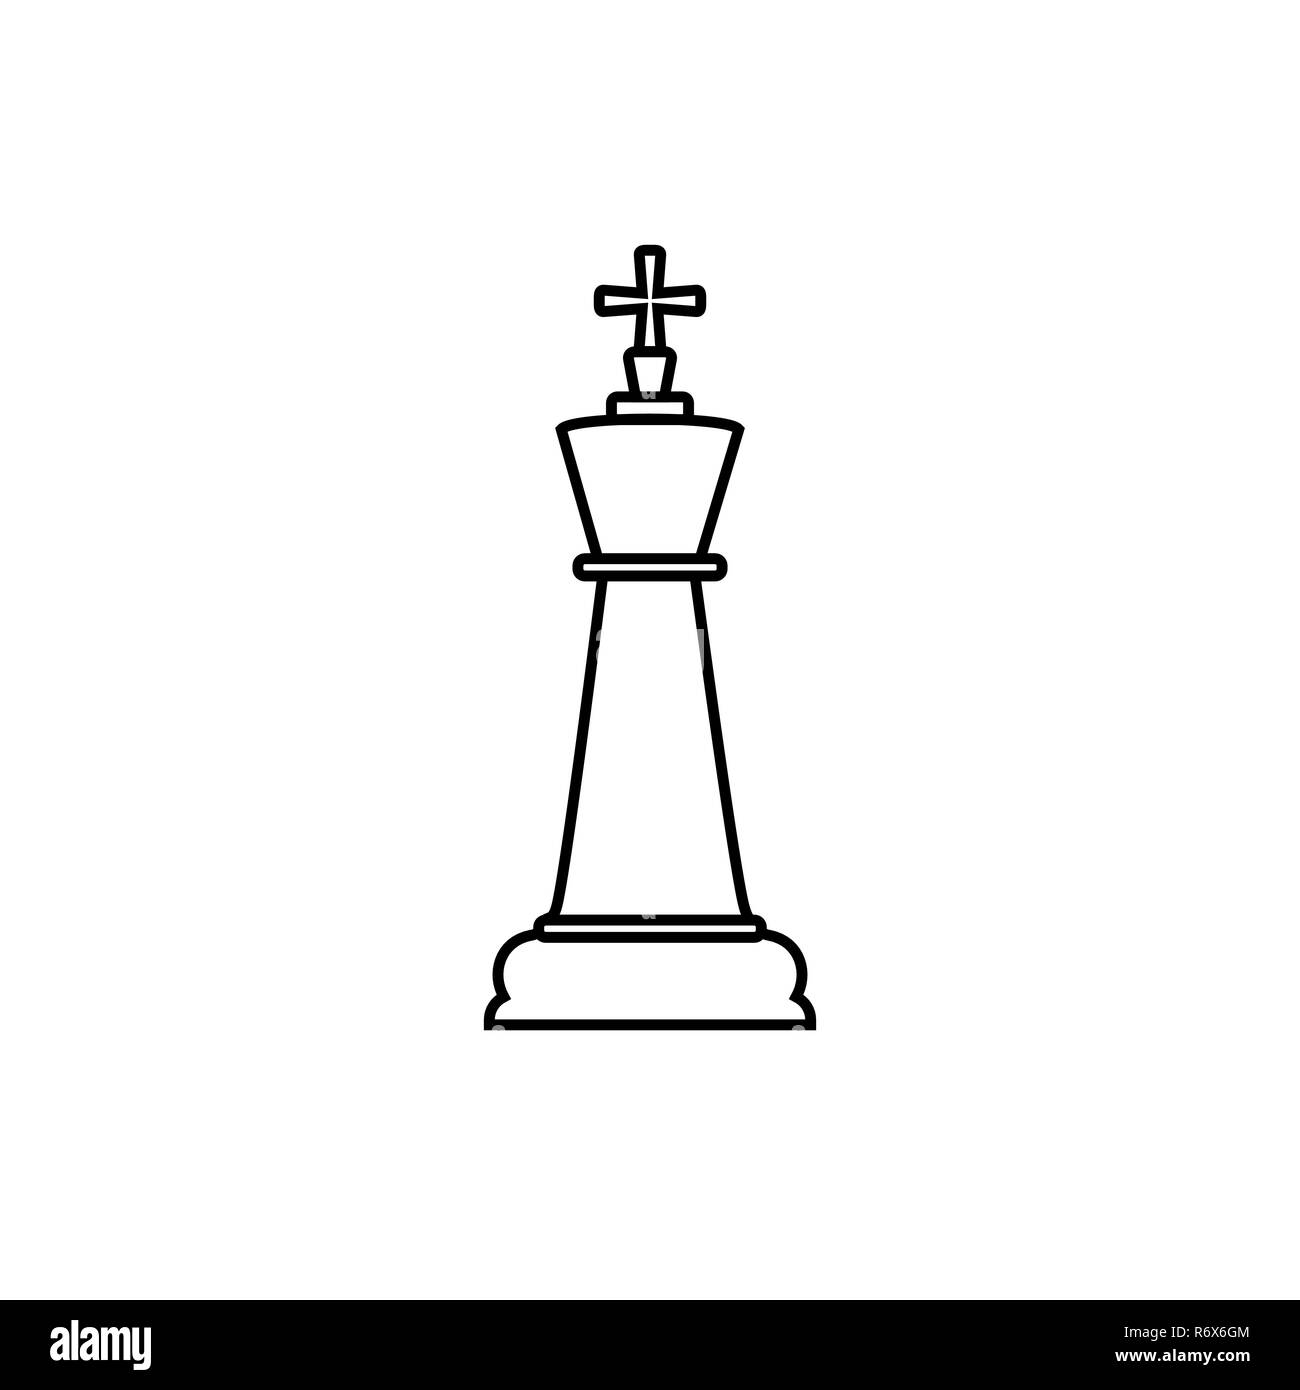 Chess Board. Vector Drawing Stock Vector - Illustration of piece, leader:  141703134